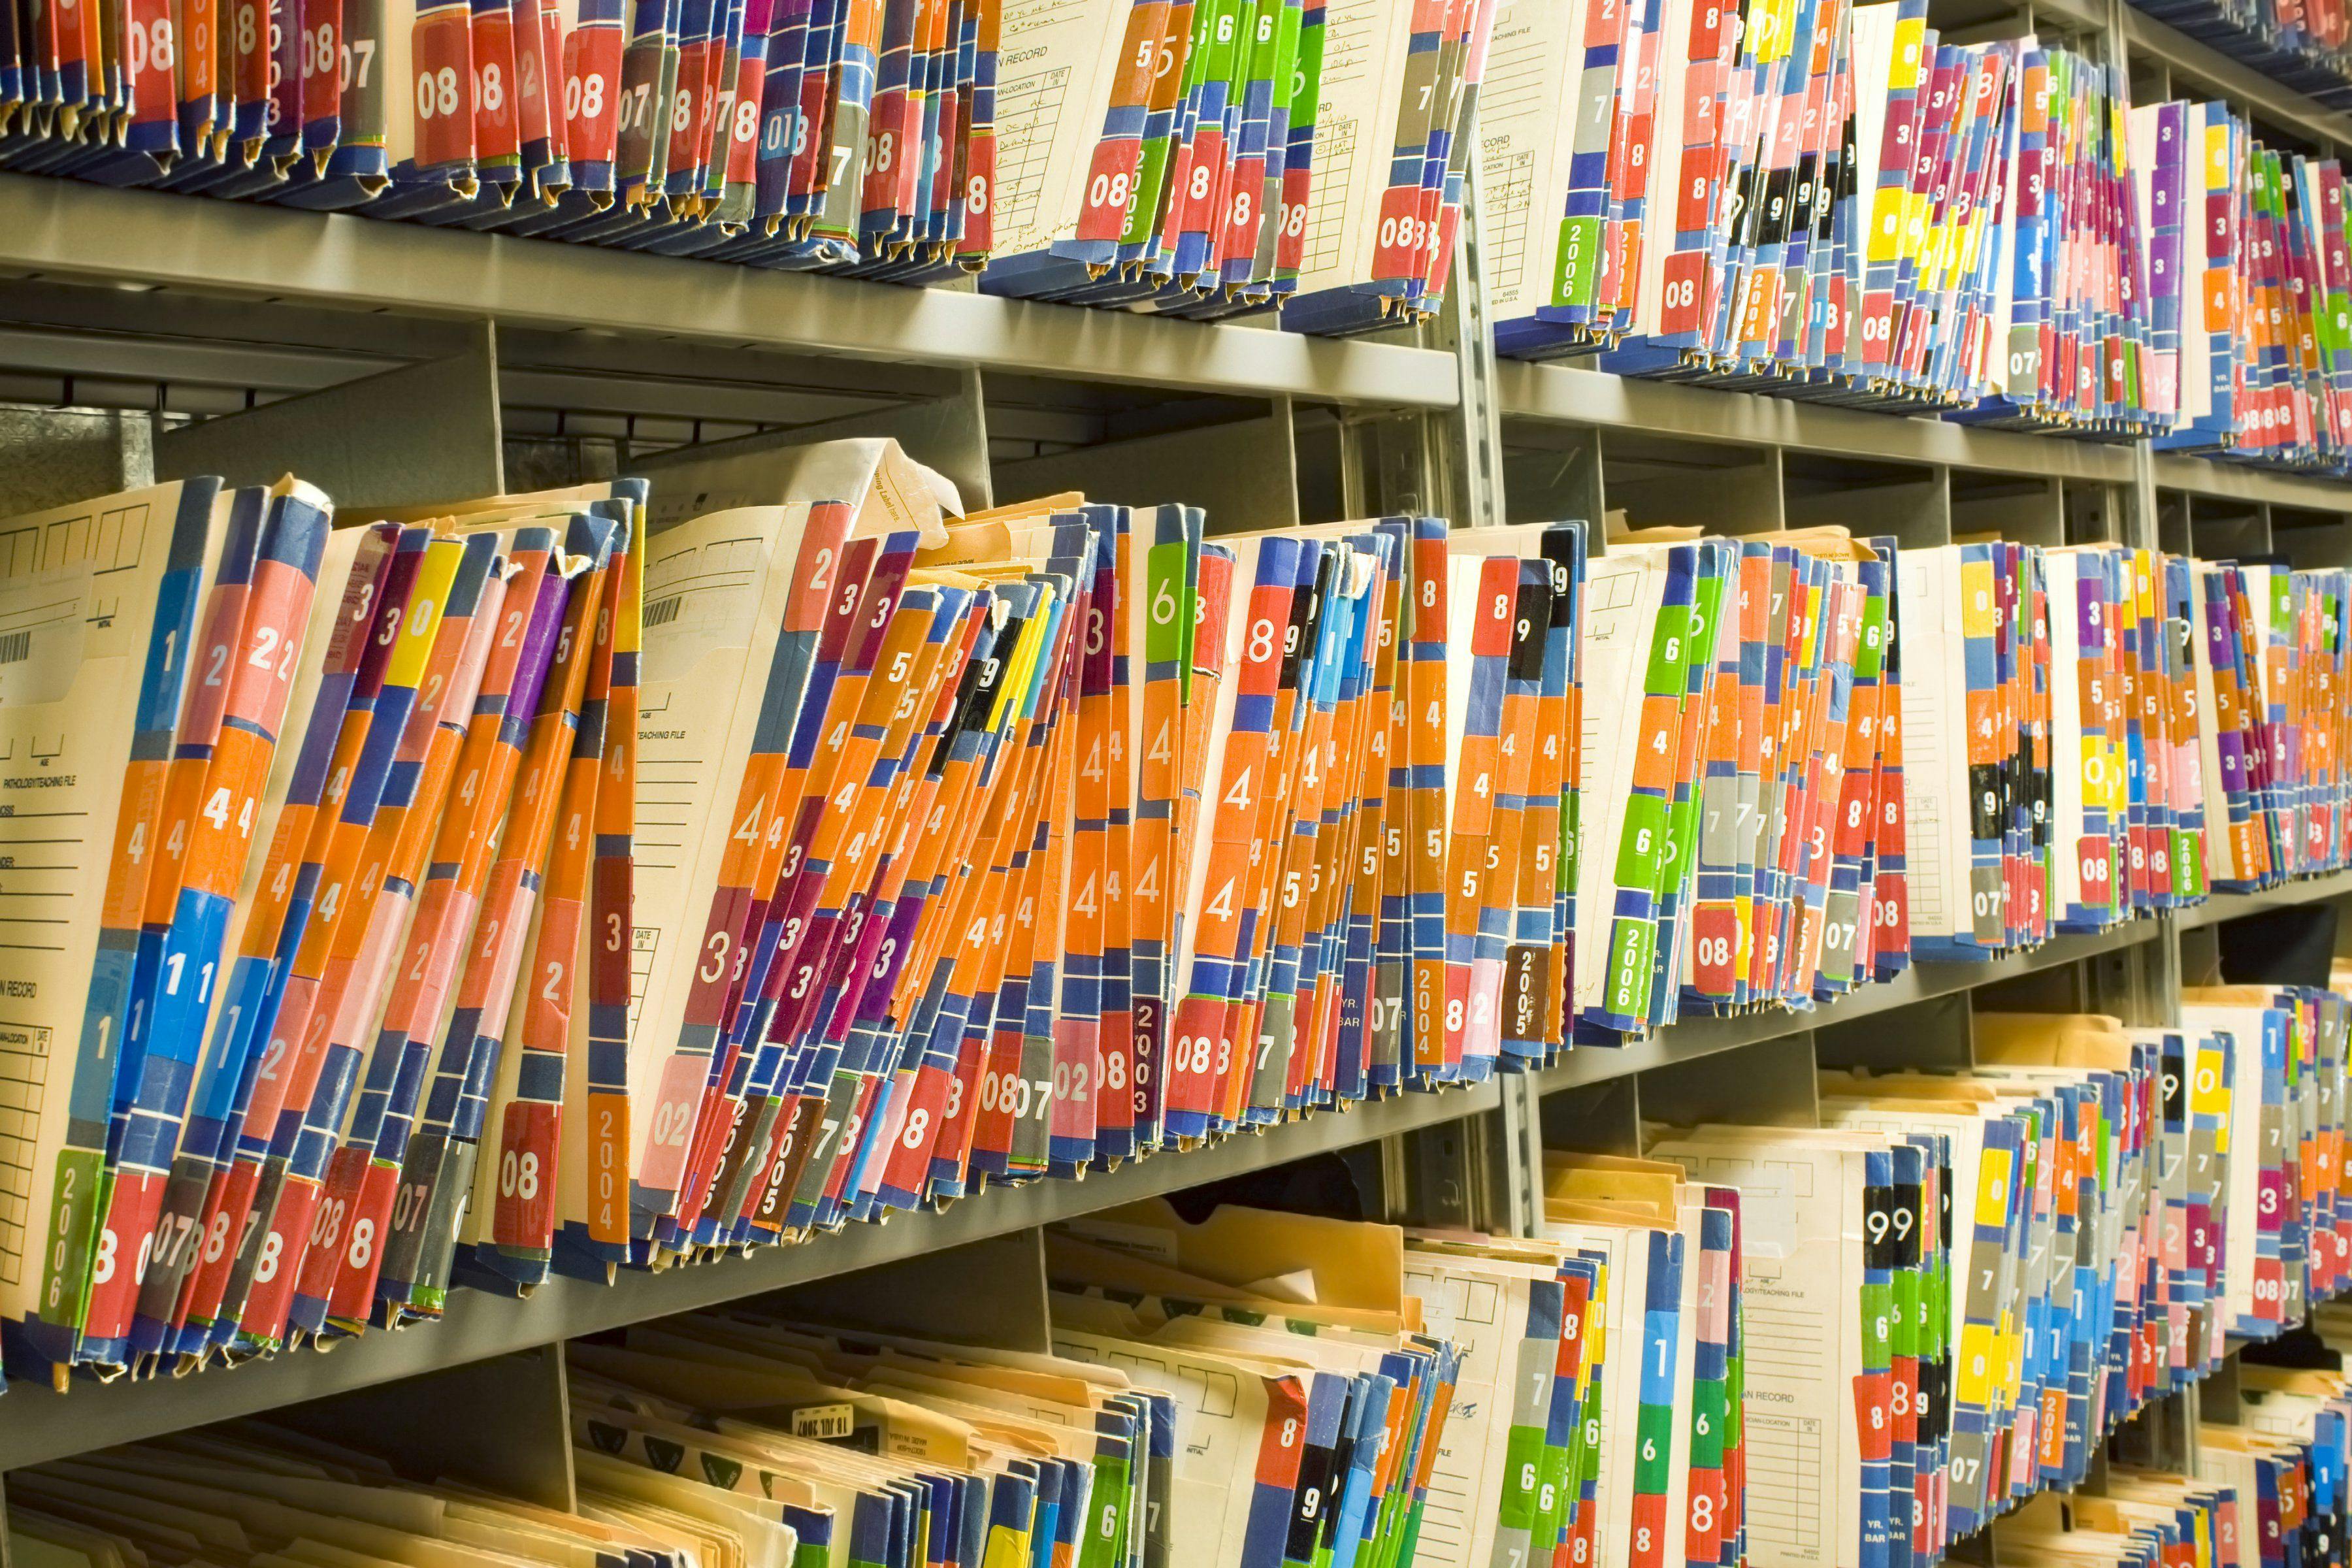 Who owns your medical records?